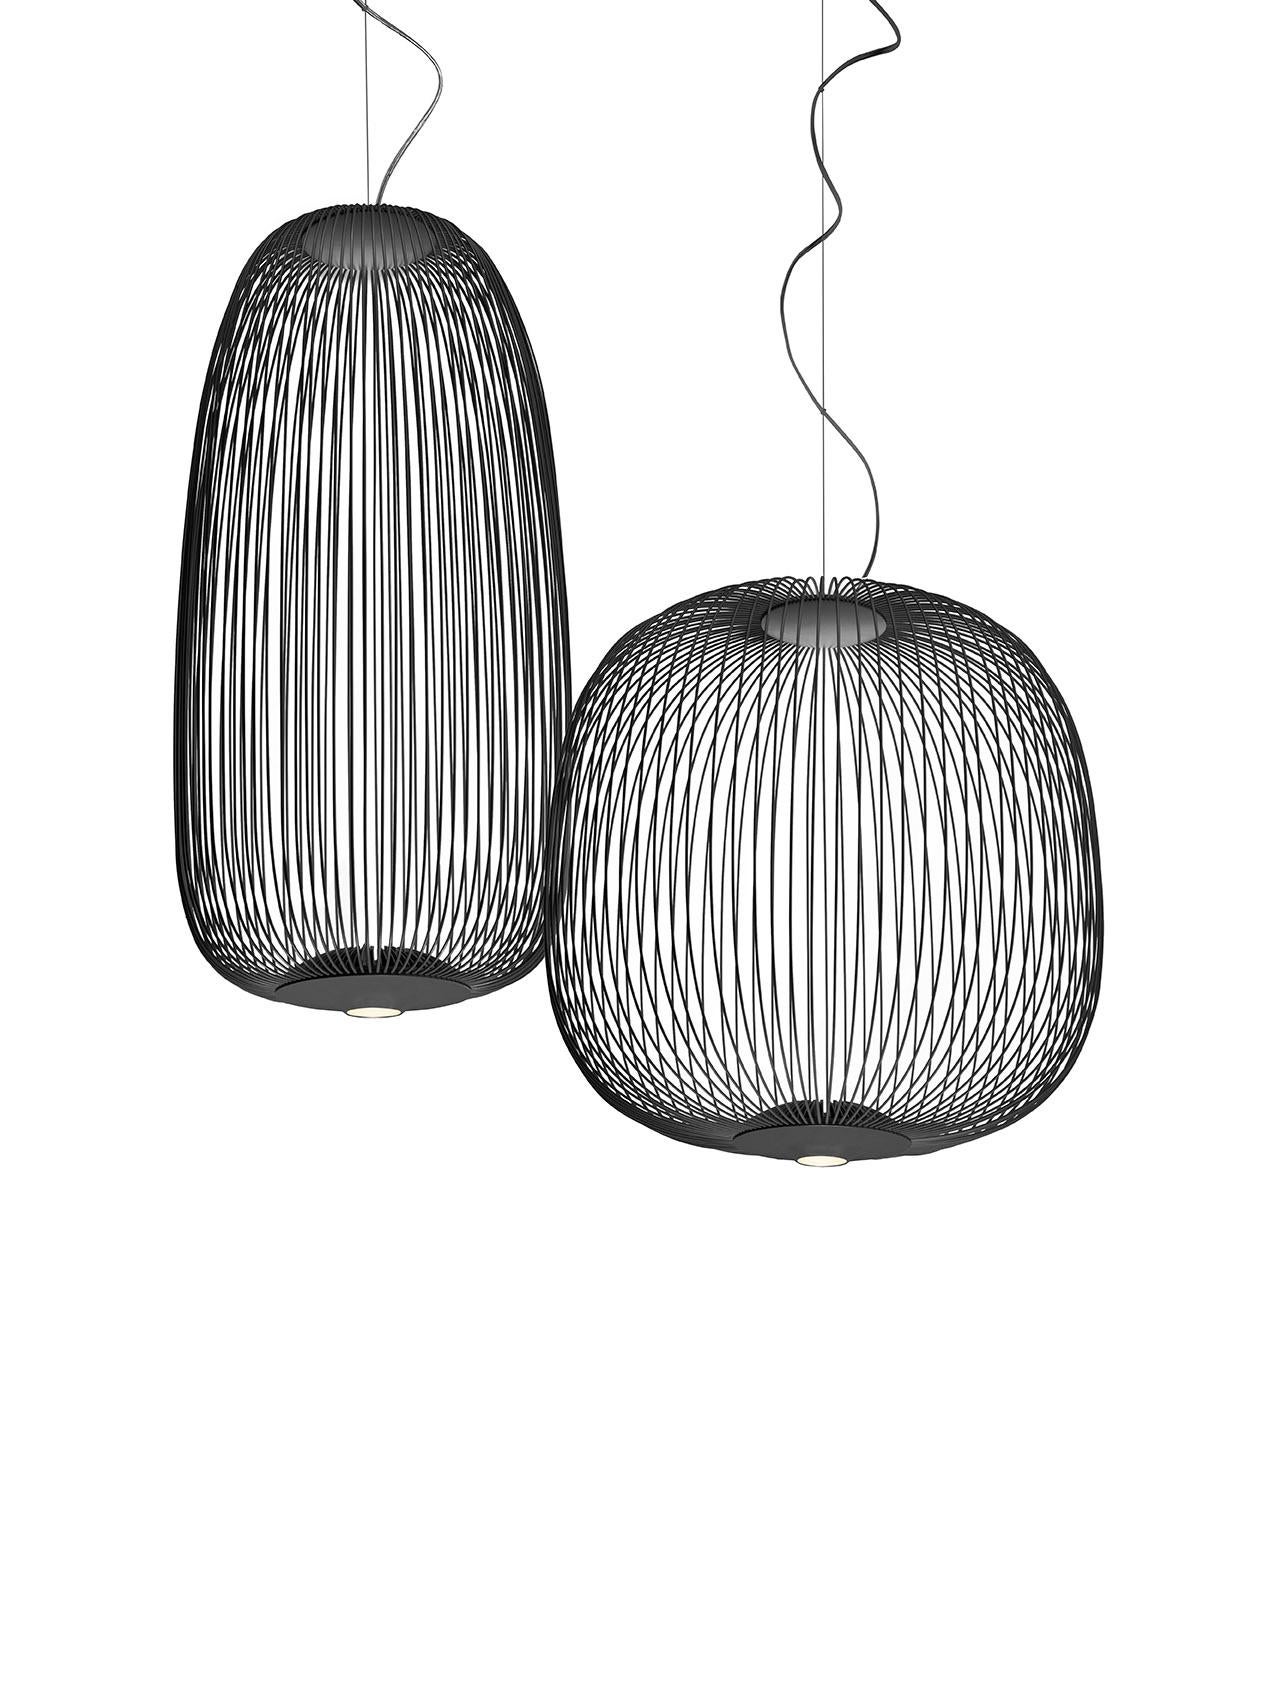 Foscarini Spokes 2 Large Suspension Lamp in Graphite by Garcia and Cumini In New Condition For Sale In Brooklyn, NY